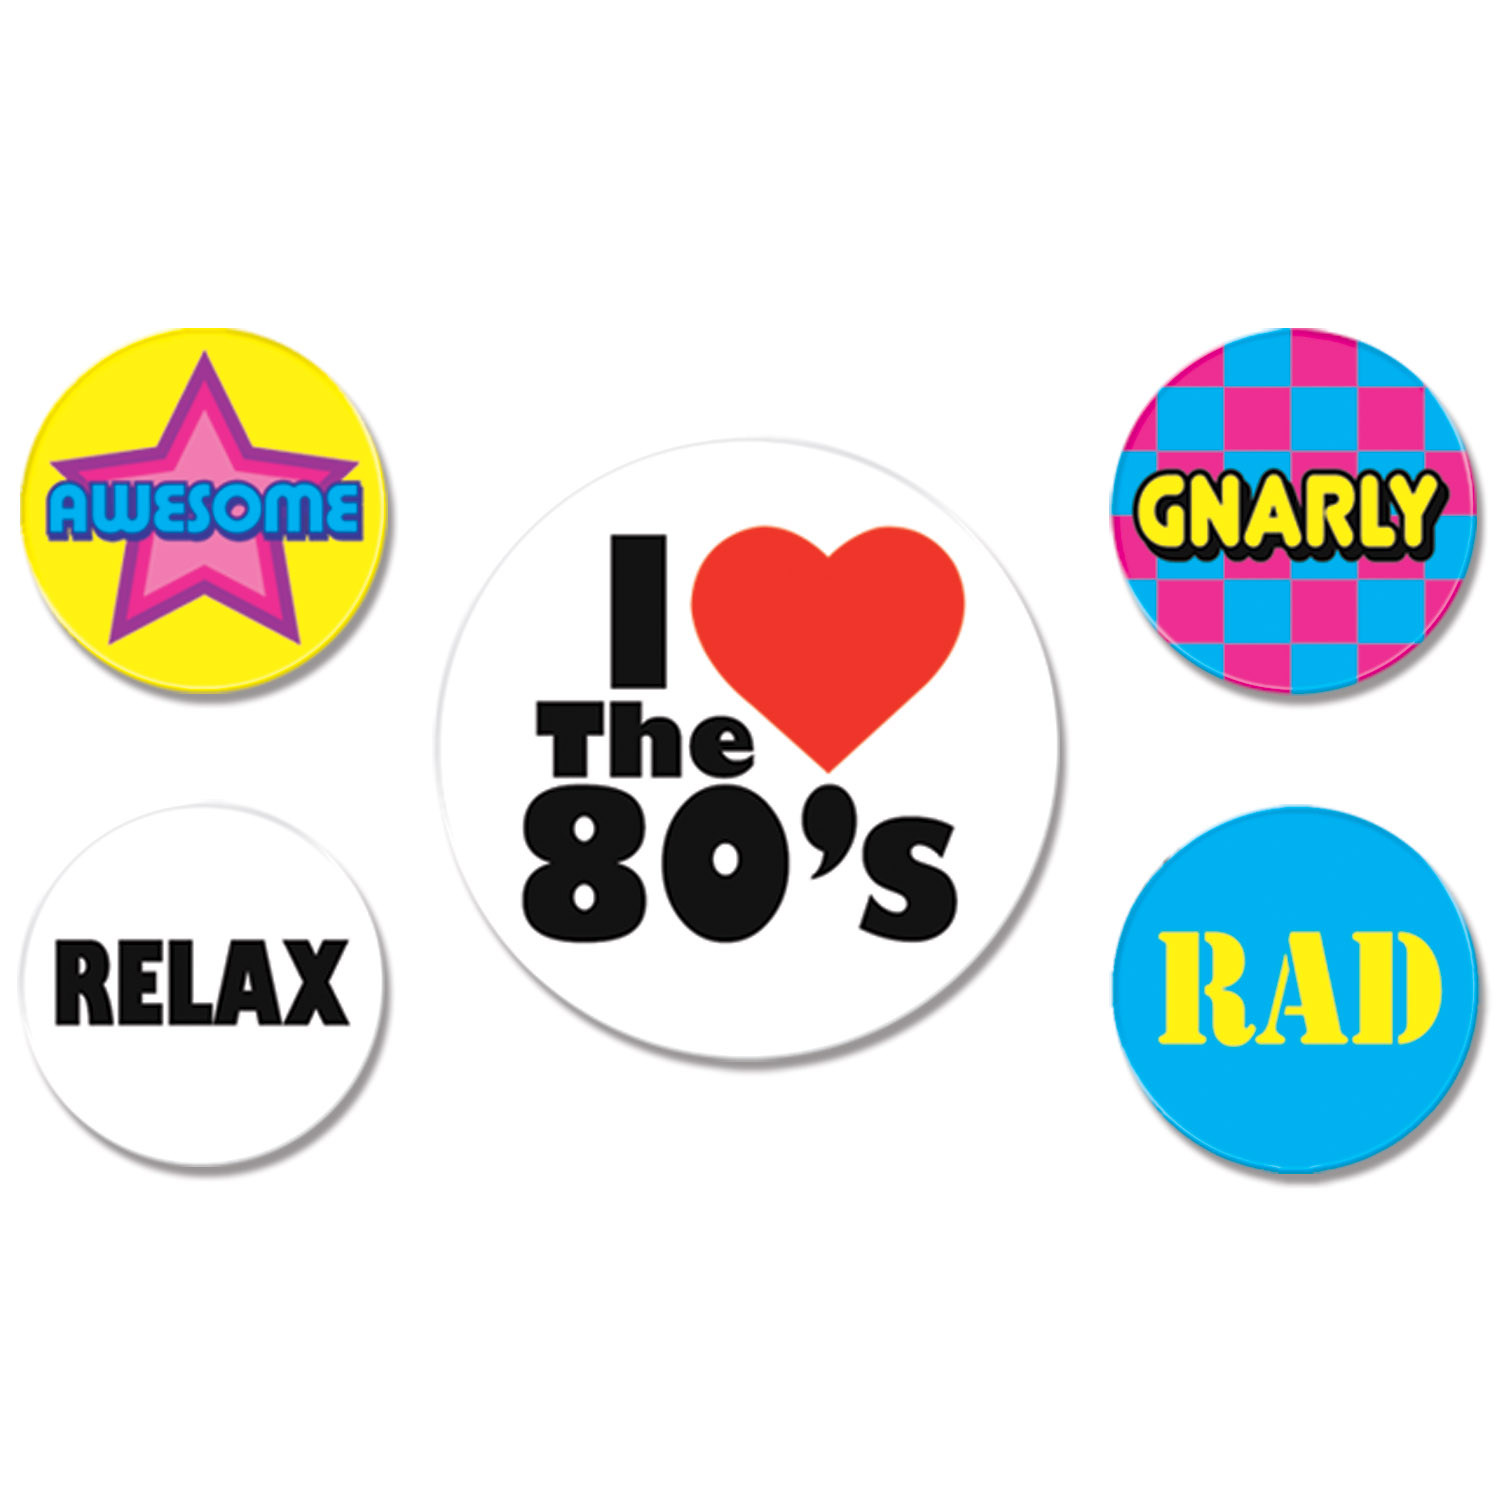 1980s buttons that say I love the 80s, gnarly, rad, relax